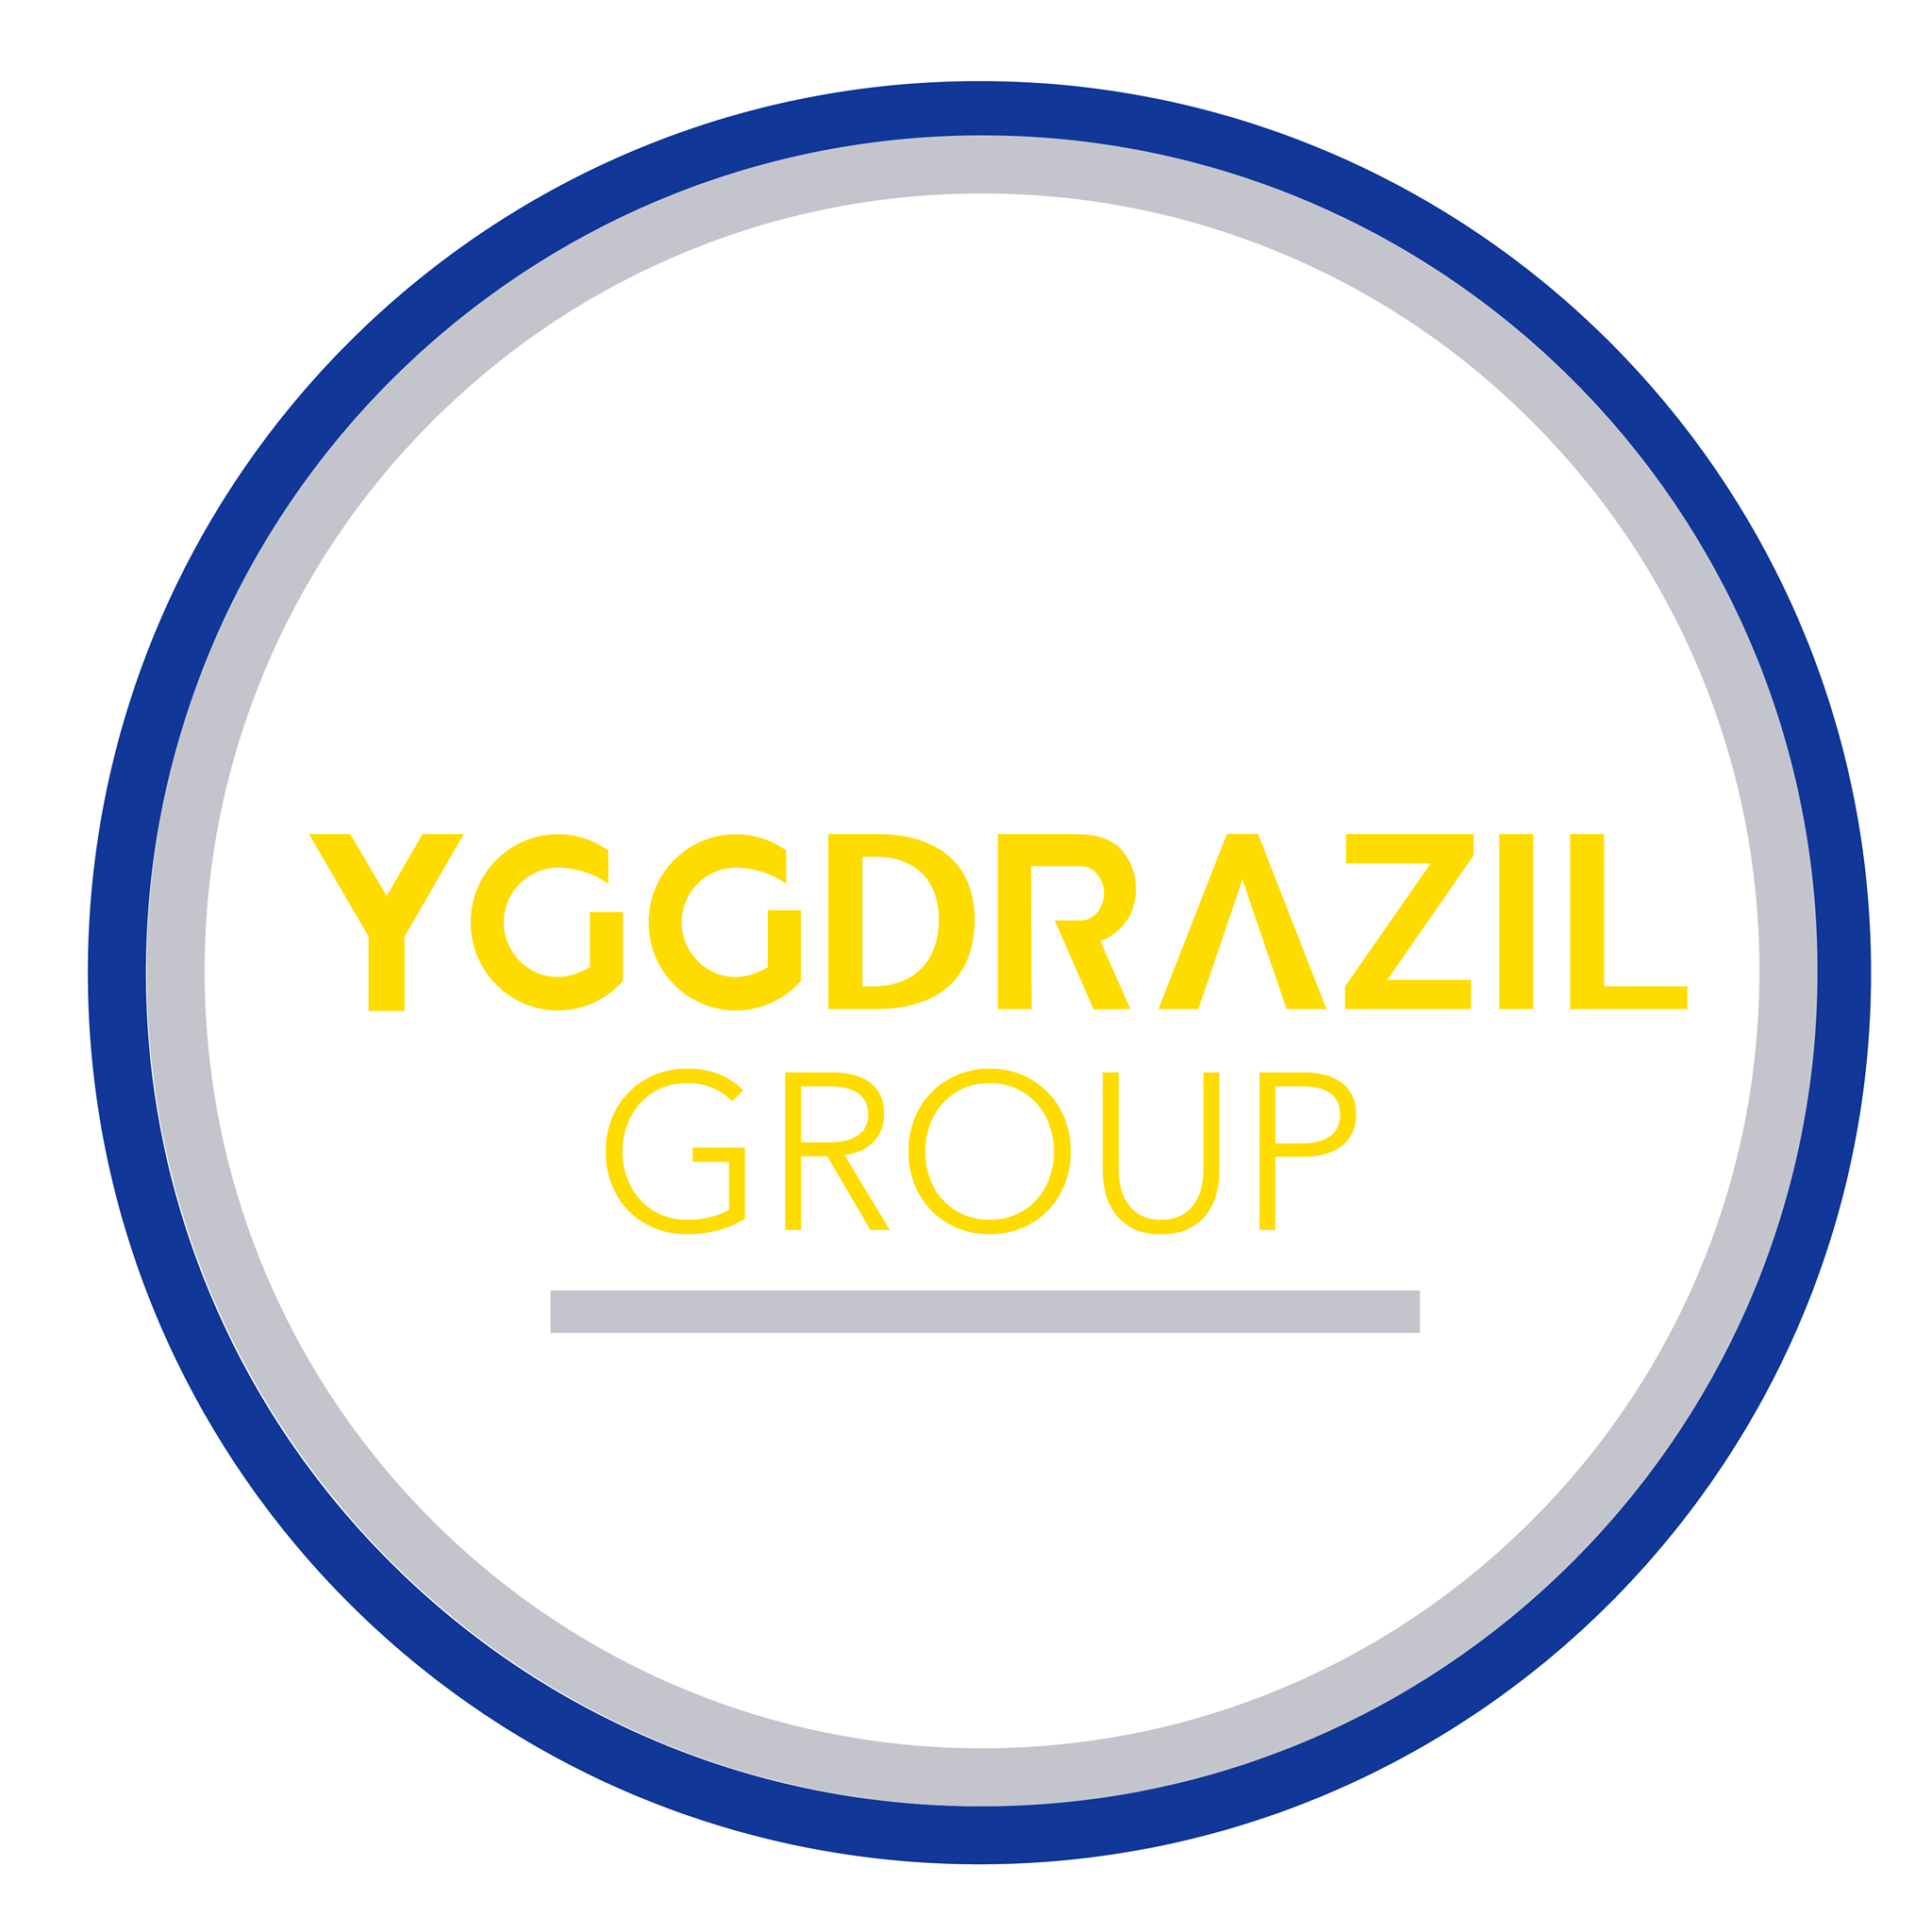 YGGDRAZIL GROUP